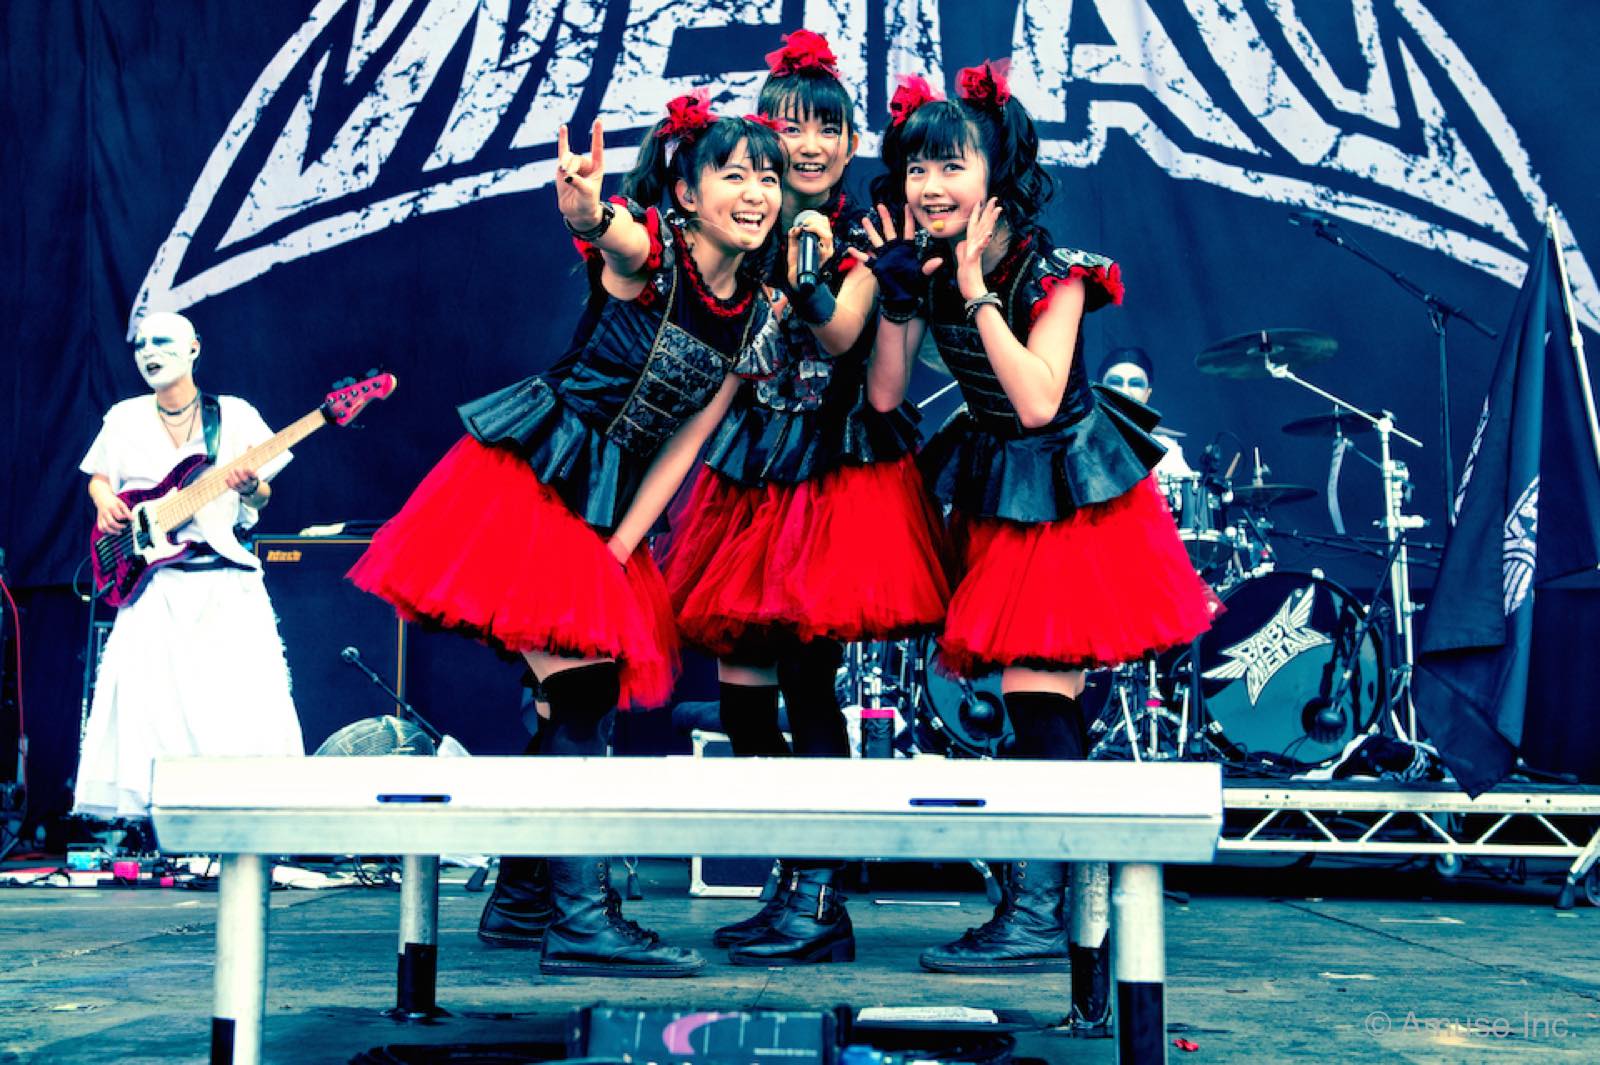 BABYMETAL Return to the UK! Bring “True Metal” to Reading and Leeds Festivals 2015!